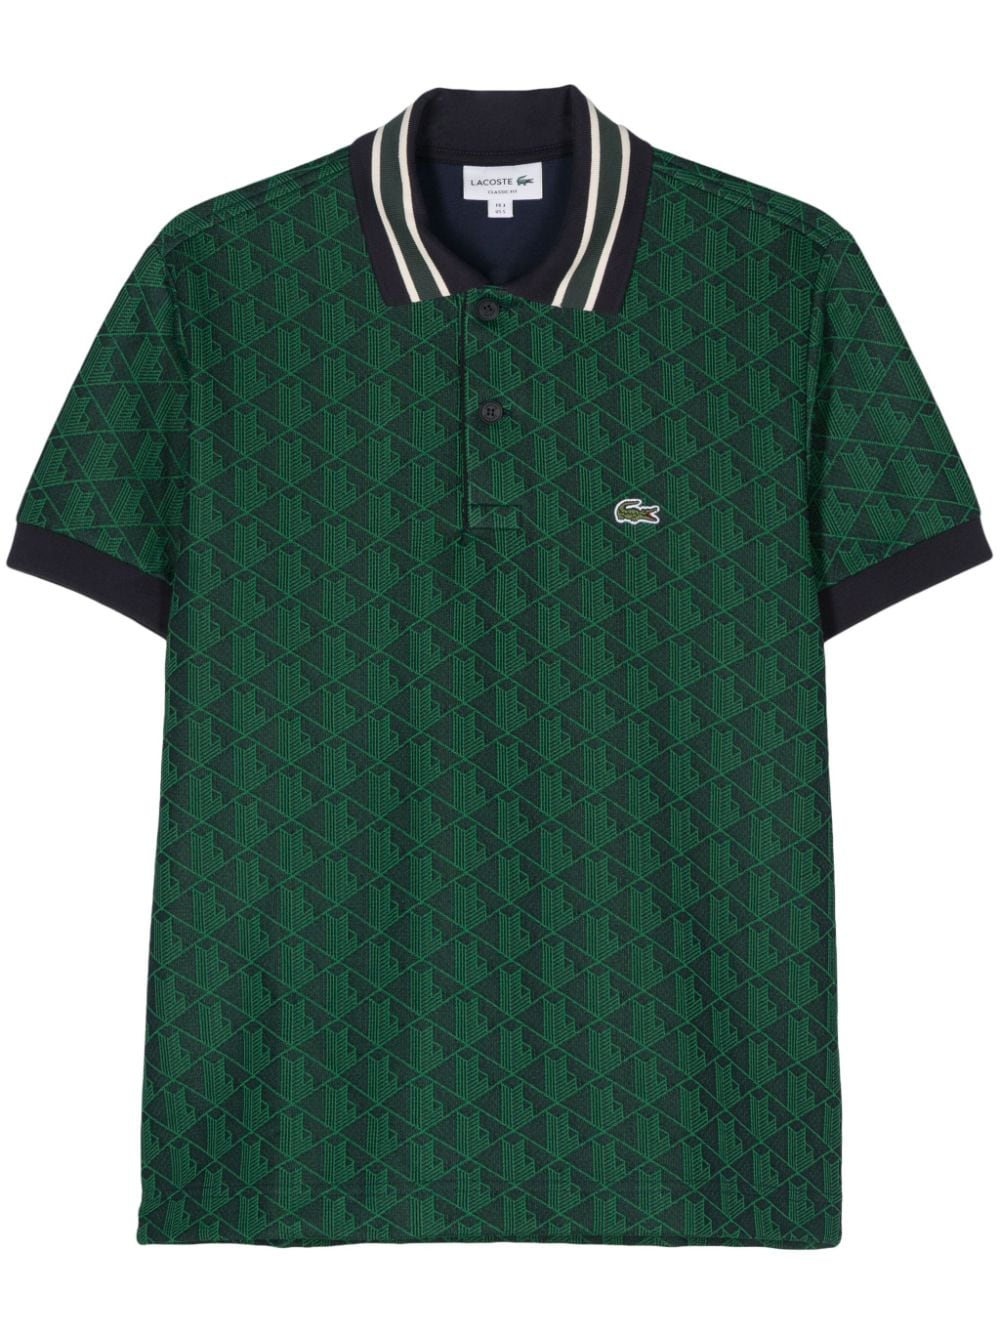 Lacoste 标贴polo衫 In Green